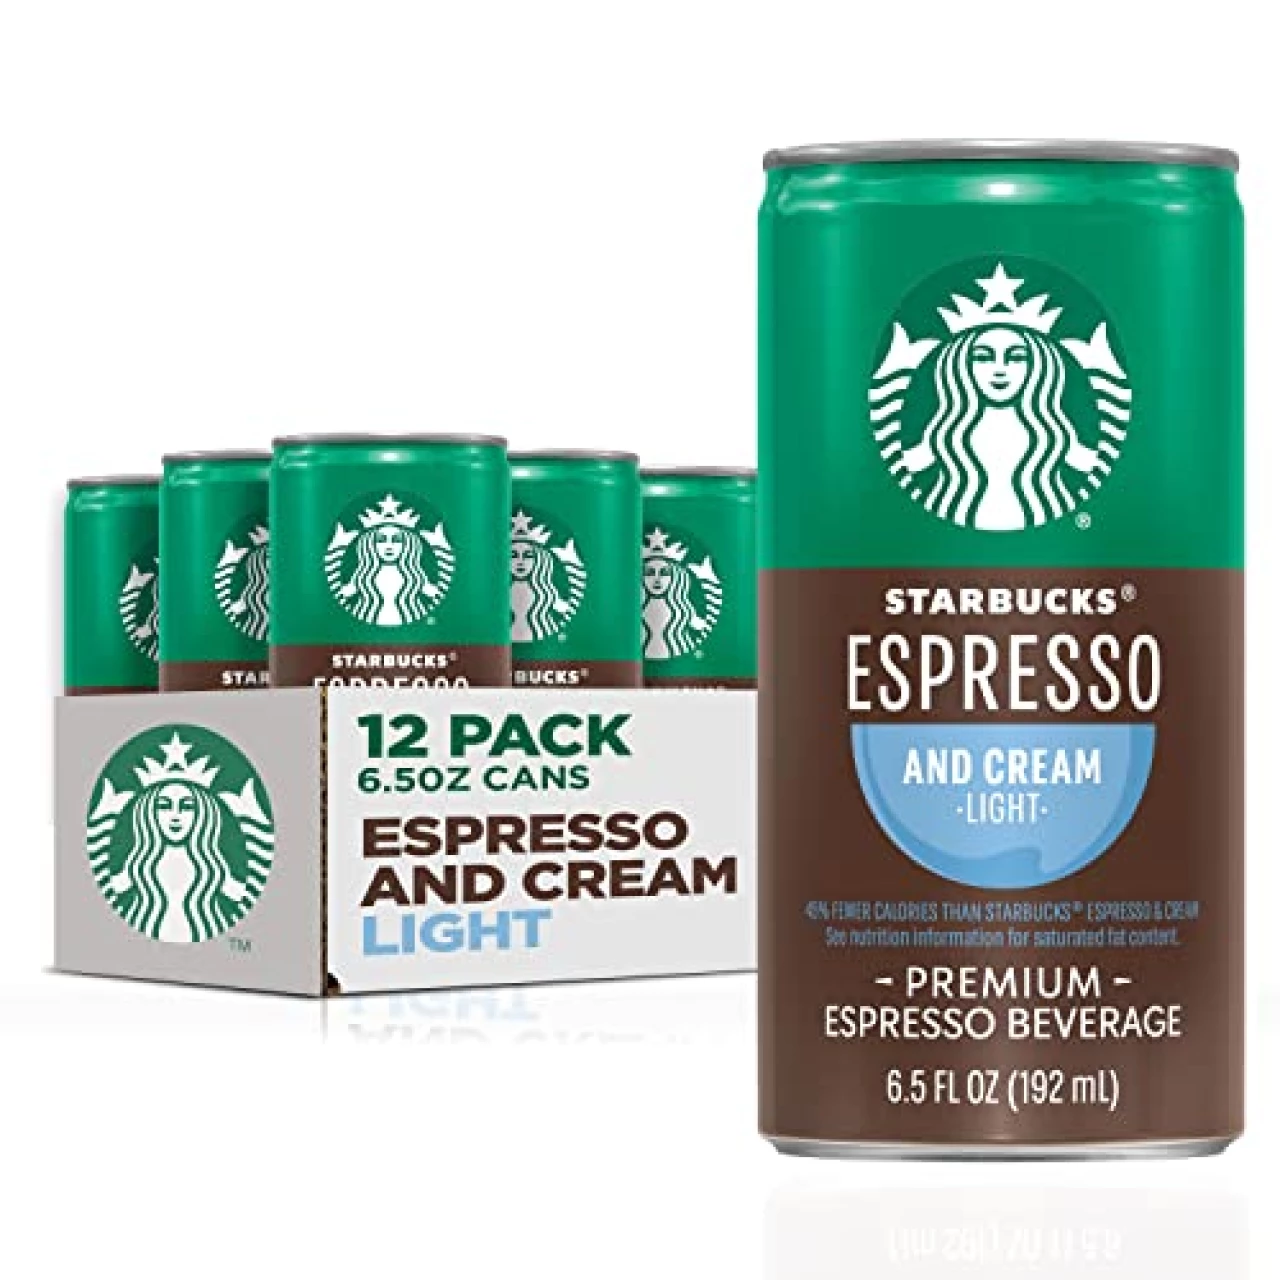 Starbucks Ready to Drink Coffee, Espresso &amp; Cream Light, 6.5oz Cans (12 Pack)